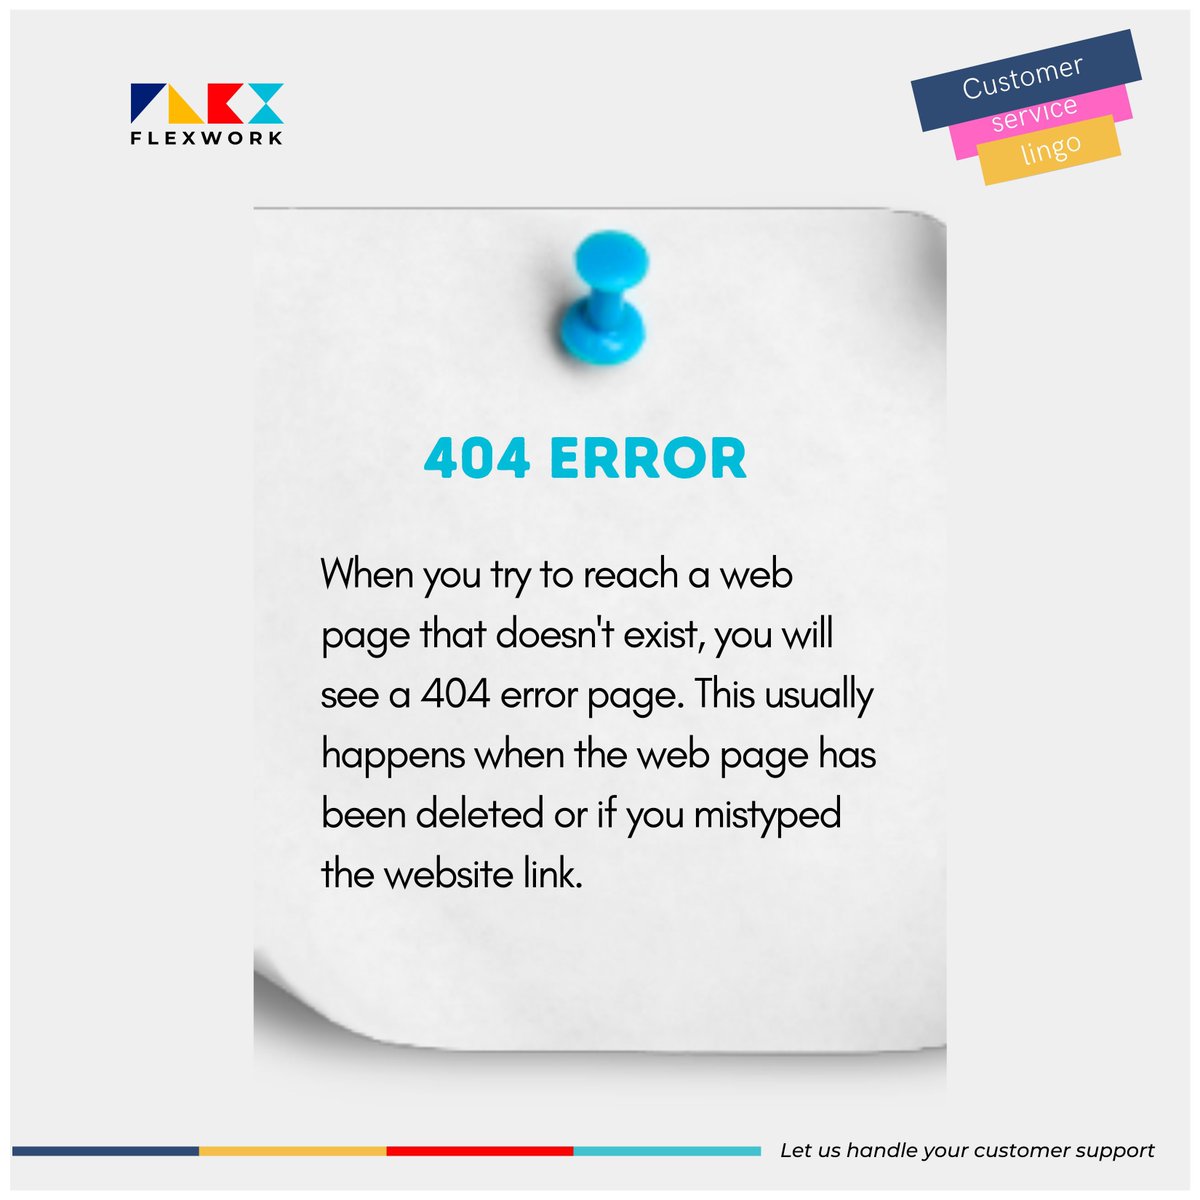 Have you ever come across a “404 error” page? Read what it means below… #Flexwork #CustomerSupport #CustomerService #CustomerExperience #Business #Online